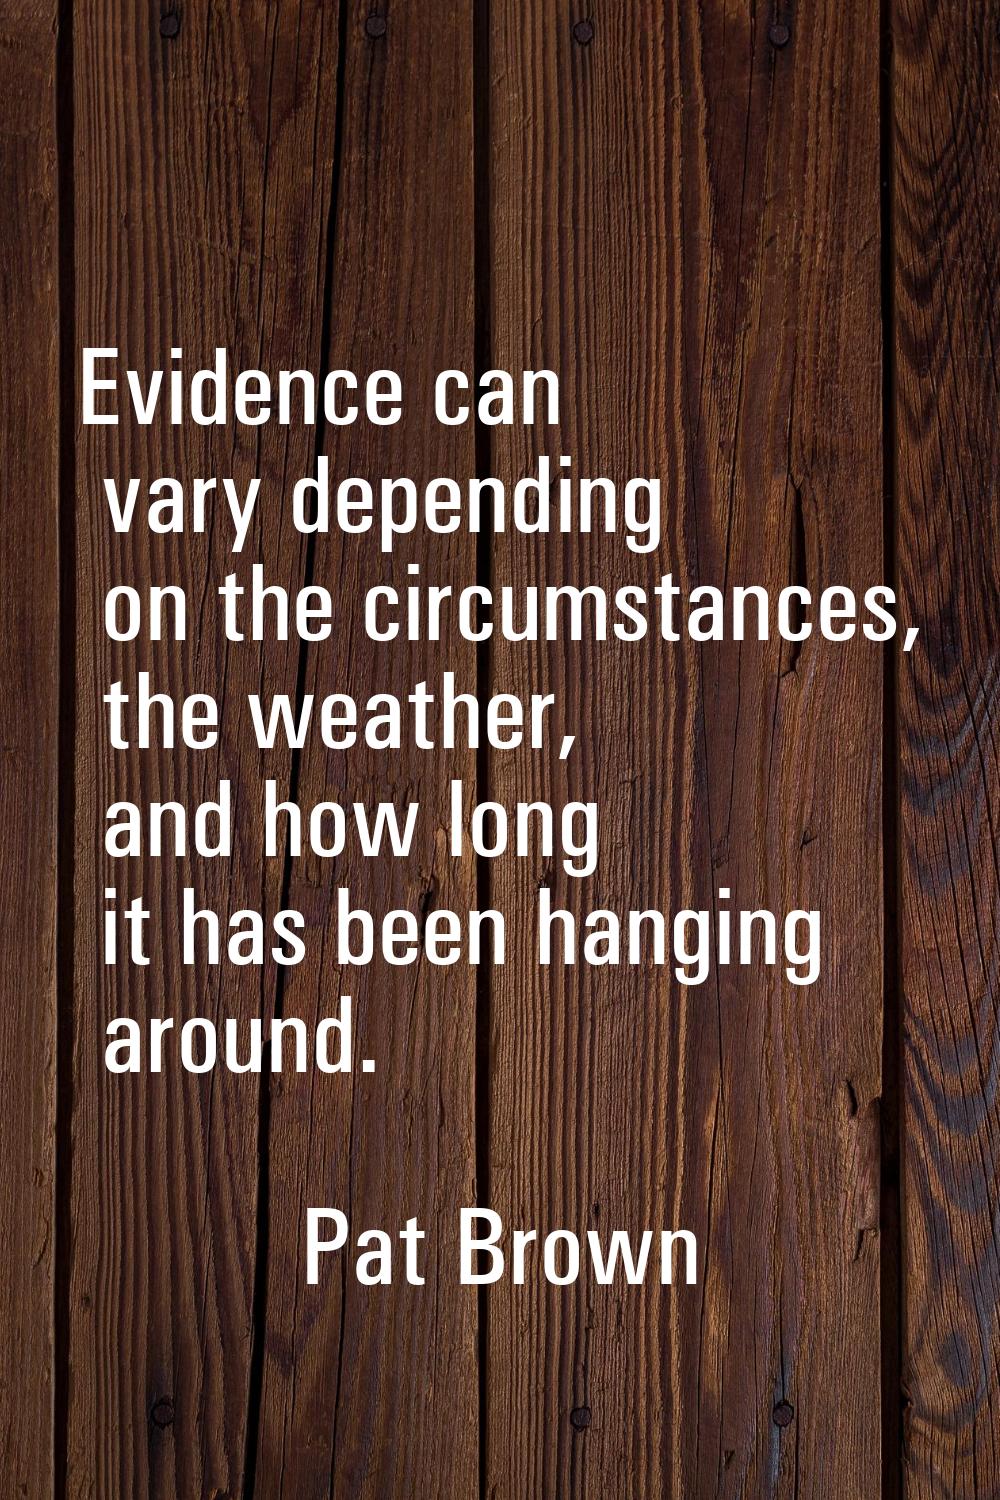 Evidence can vary depending on the circumstances, the weather, and how long it has been hanging aro